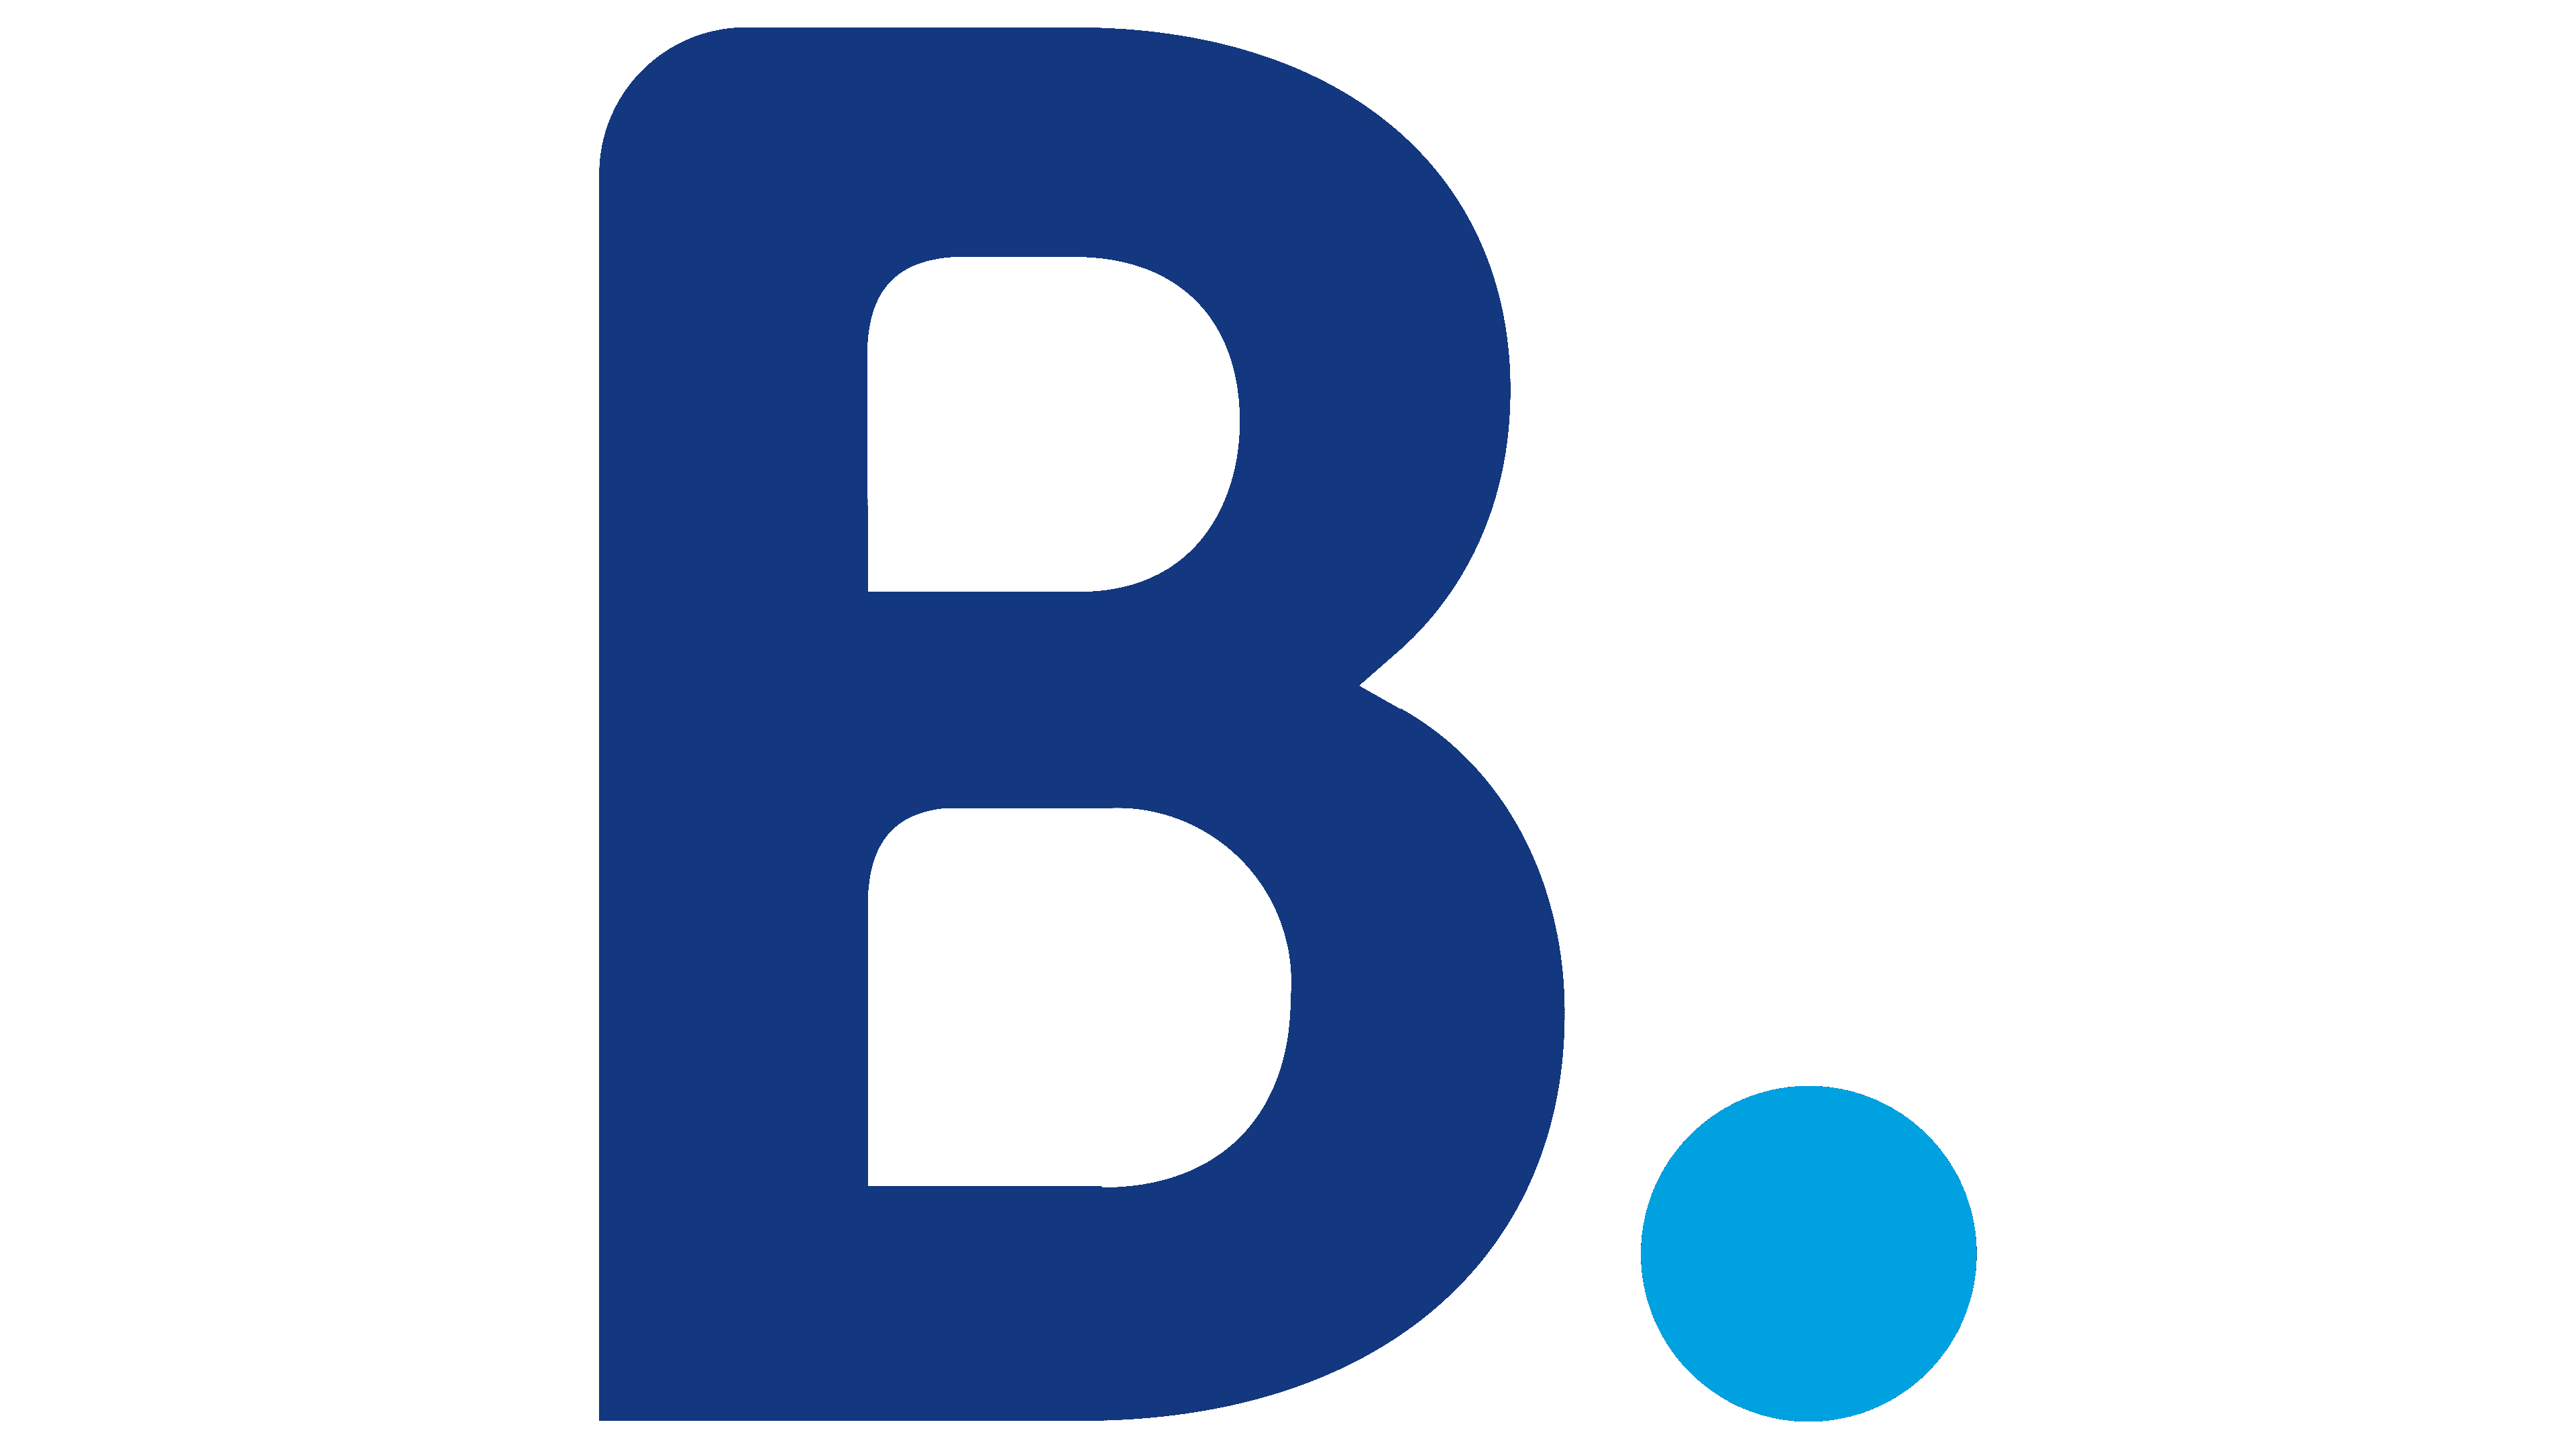 Booking.Com Logo, symbol, meaning, history, PNG, brand